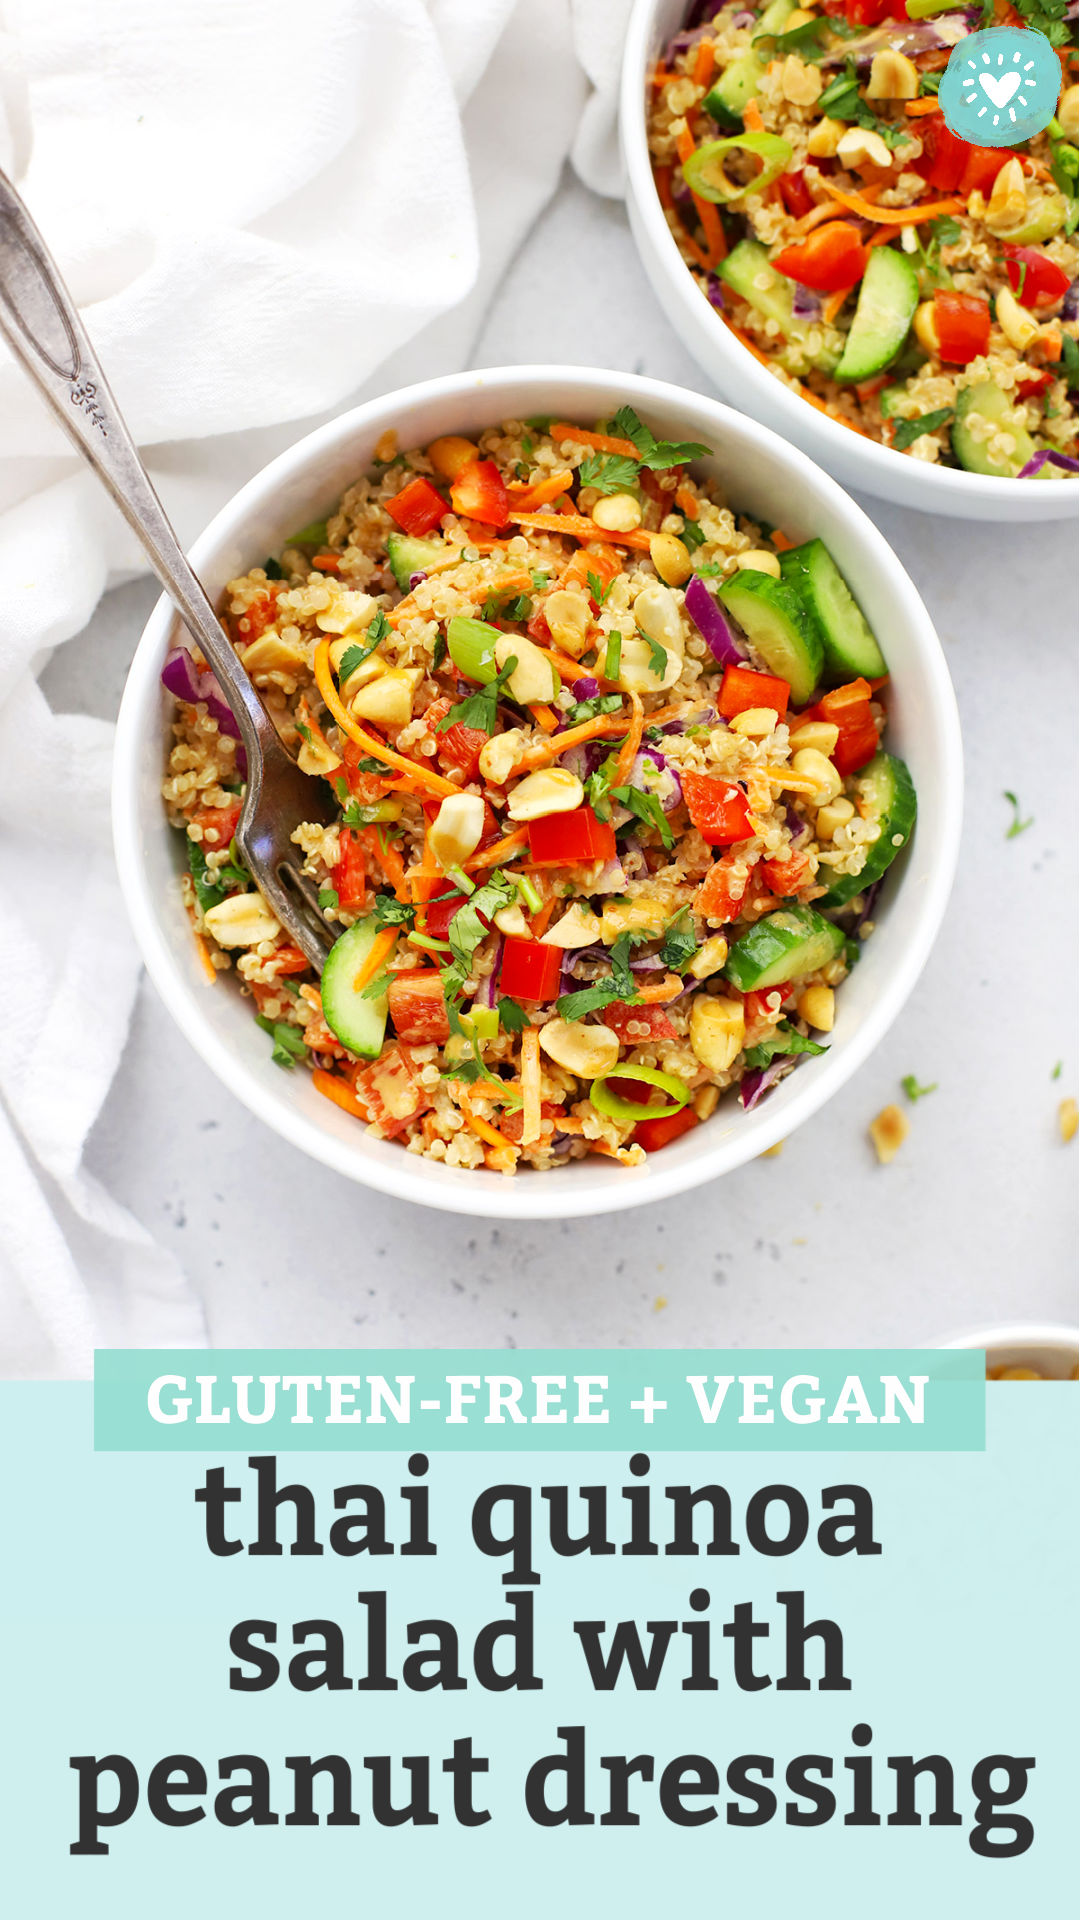 Two bowls of Thai Quinoa Salad with Peanut Dressing with text overlay that reads "Gluten-Free + Vegan Thai Quinoa Salad with Peanut Dressing"